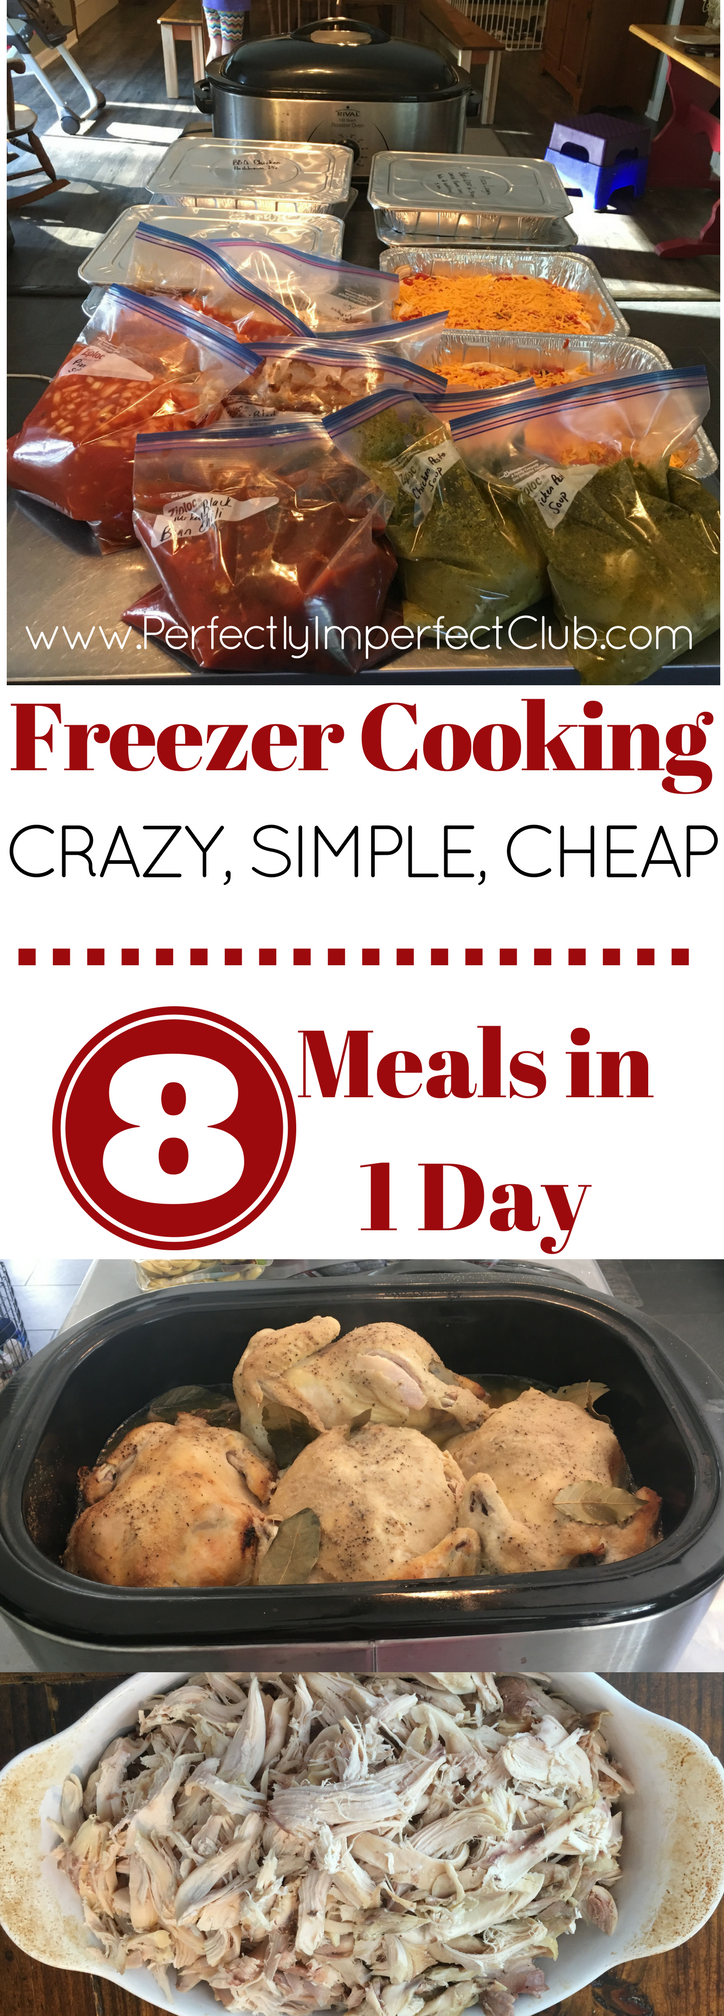 8 freezer cooking meals for just $50! Mom of 9 cooks 8 freezer meals in one day! |batch cooking|Aldi meals